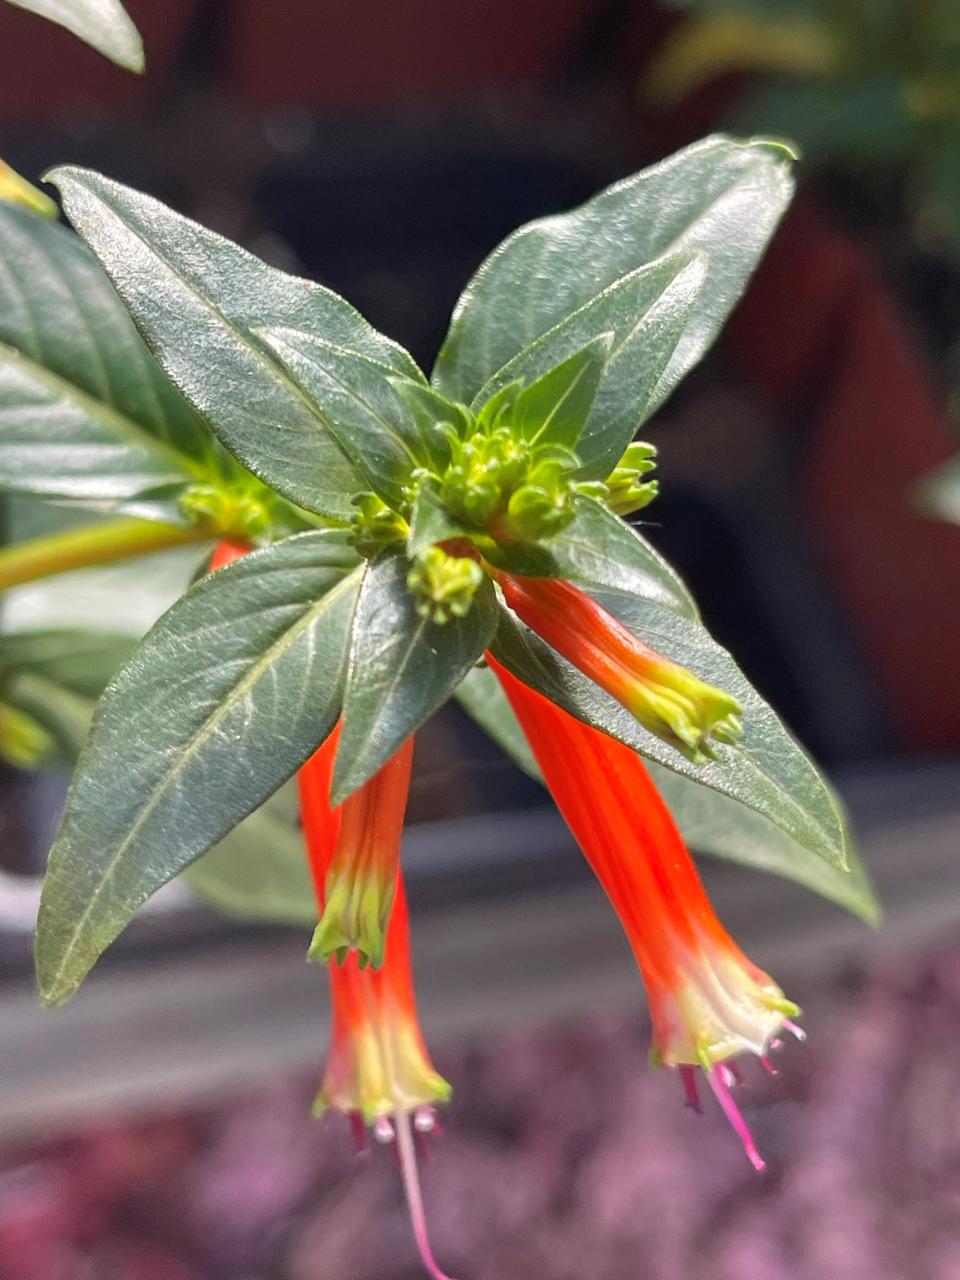 Cigar plant has petite tubular flowers that hummingbirds love to visit for nectar, making it a great choice for a patio container.